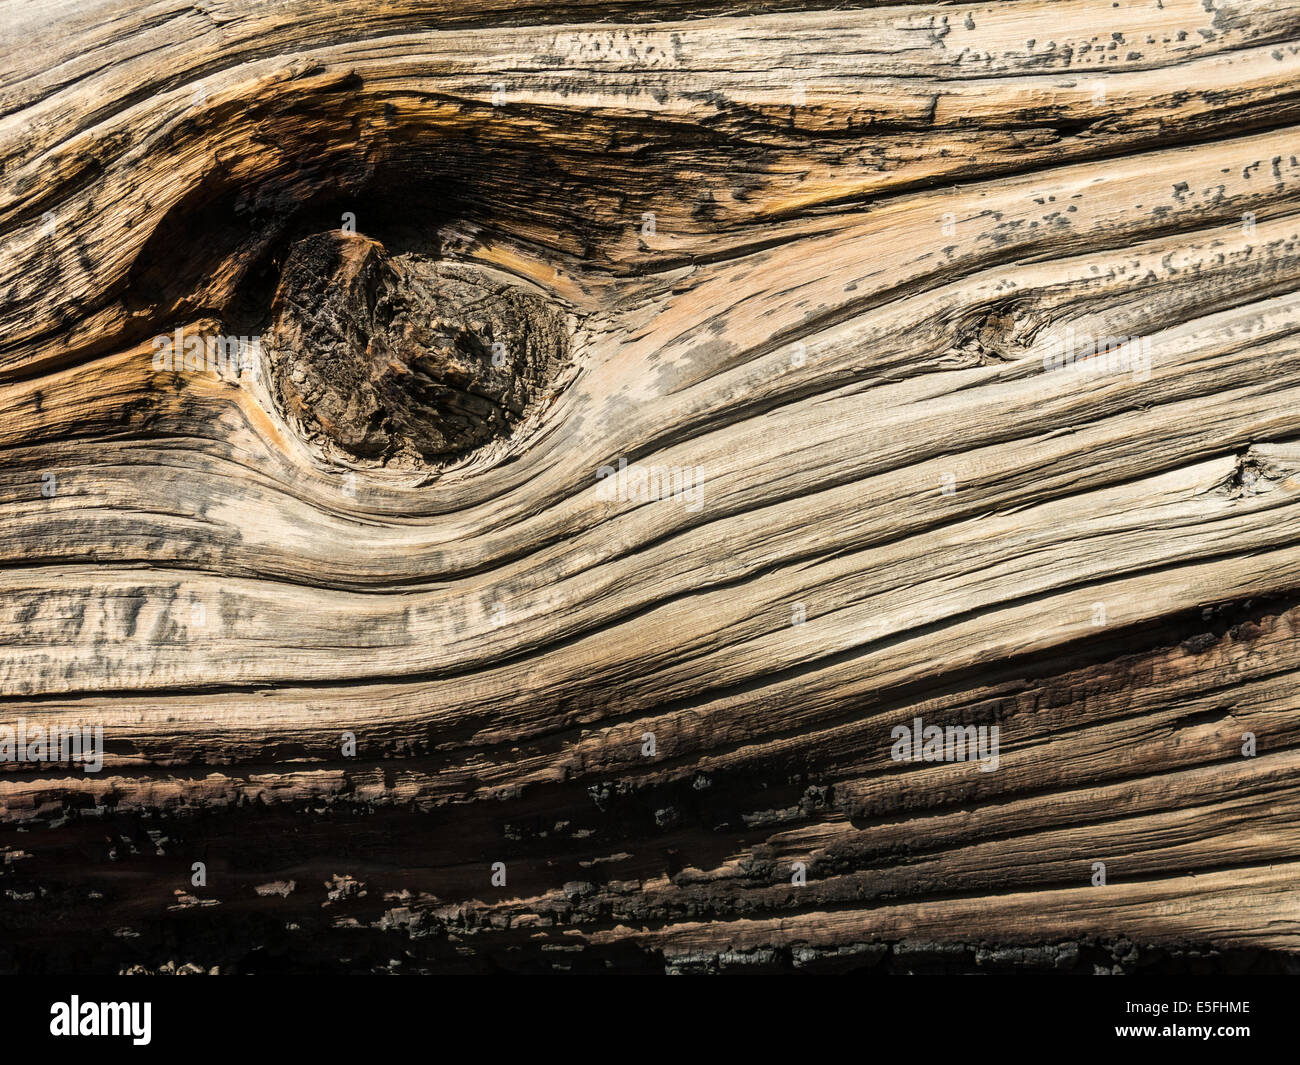 A detail of the the bark of a Ancient Bristlecone Pine (Pinus longaeva), in the Ancient Bristlecone Pine Forest, California Stock Photo